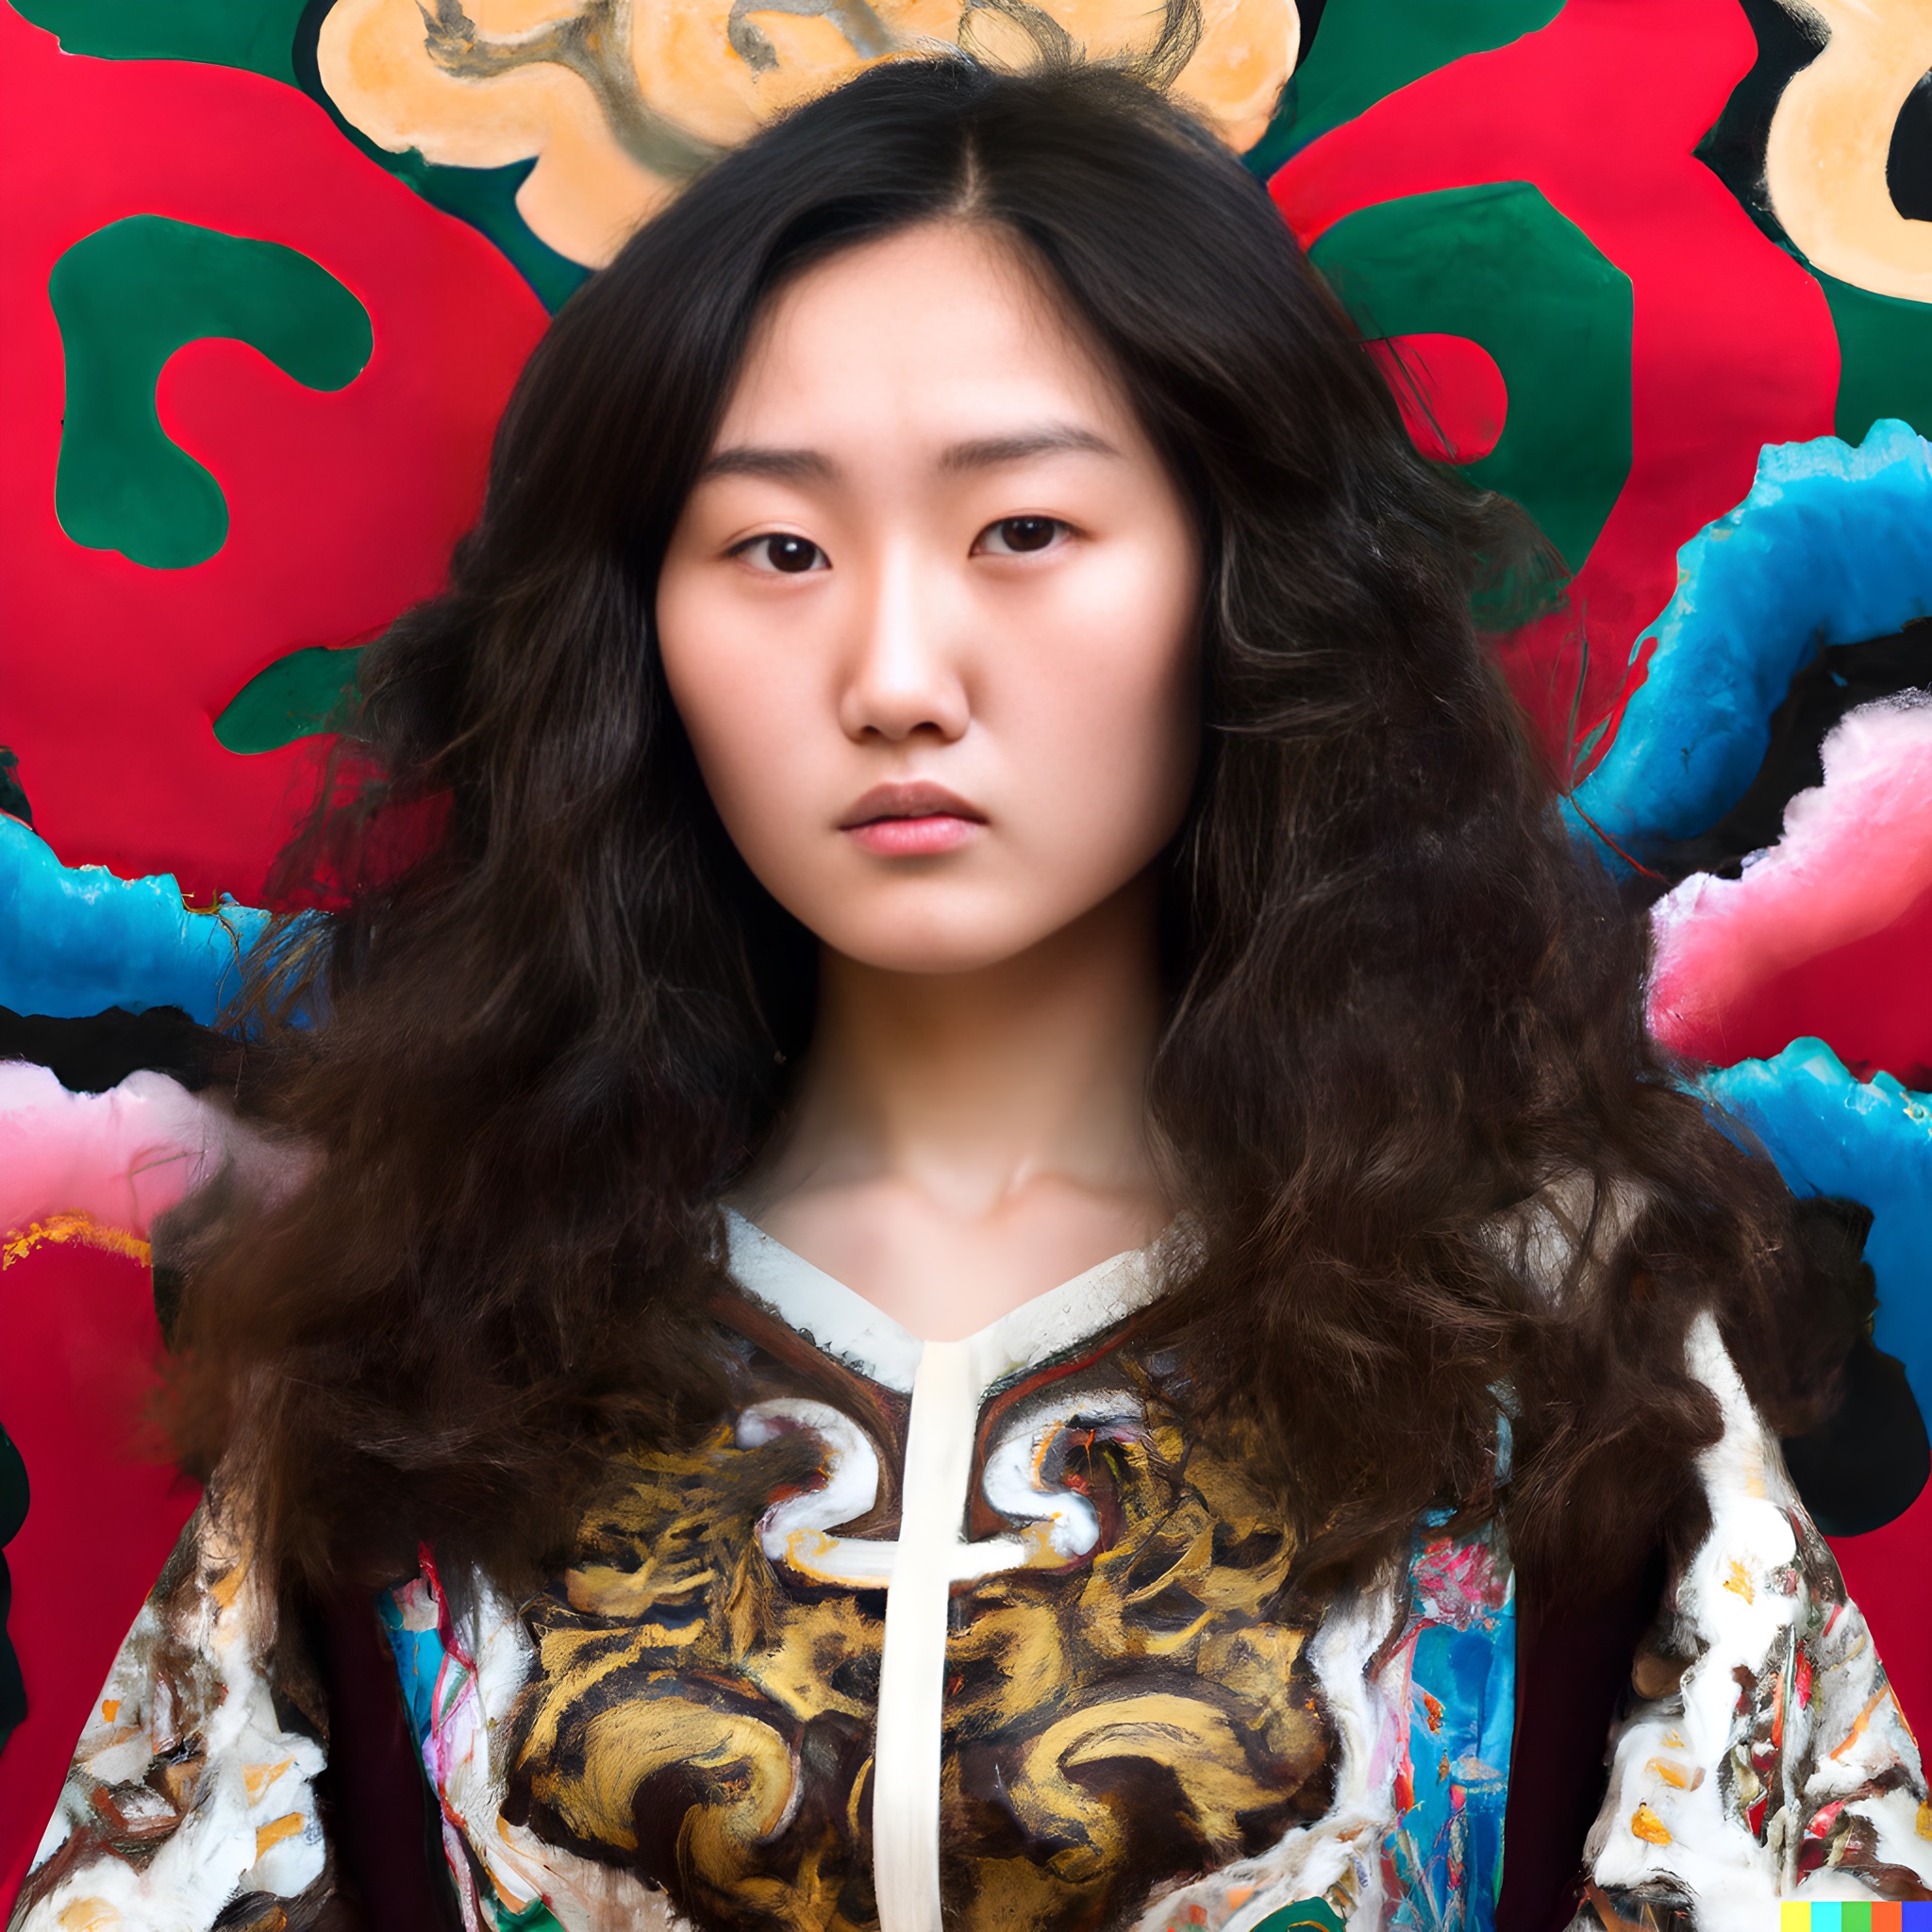 women-a-brown-curled-hair-in-a-mongolian-dress-with-intense-eyes-1